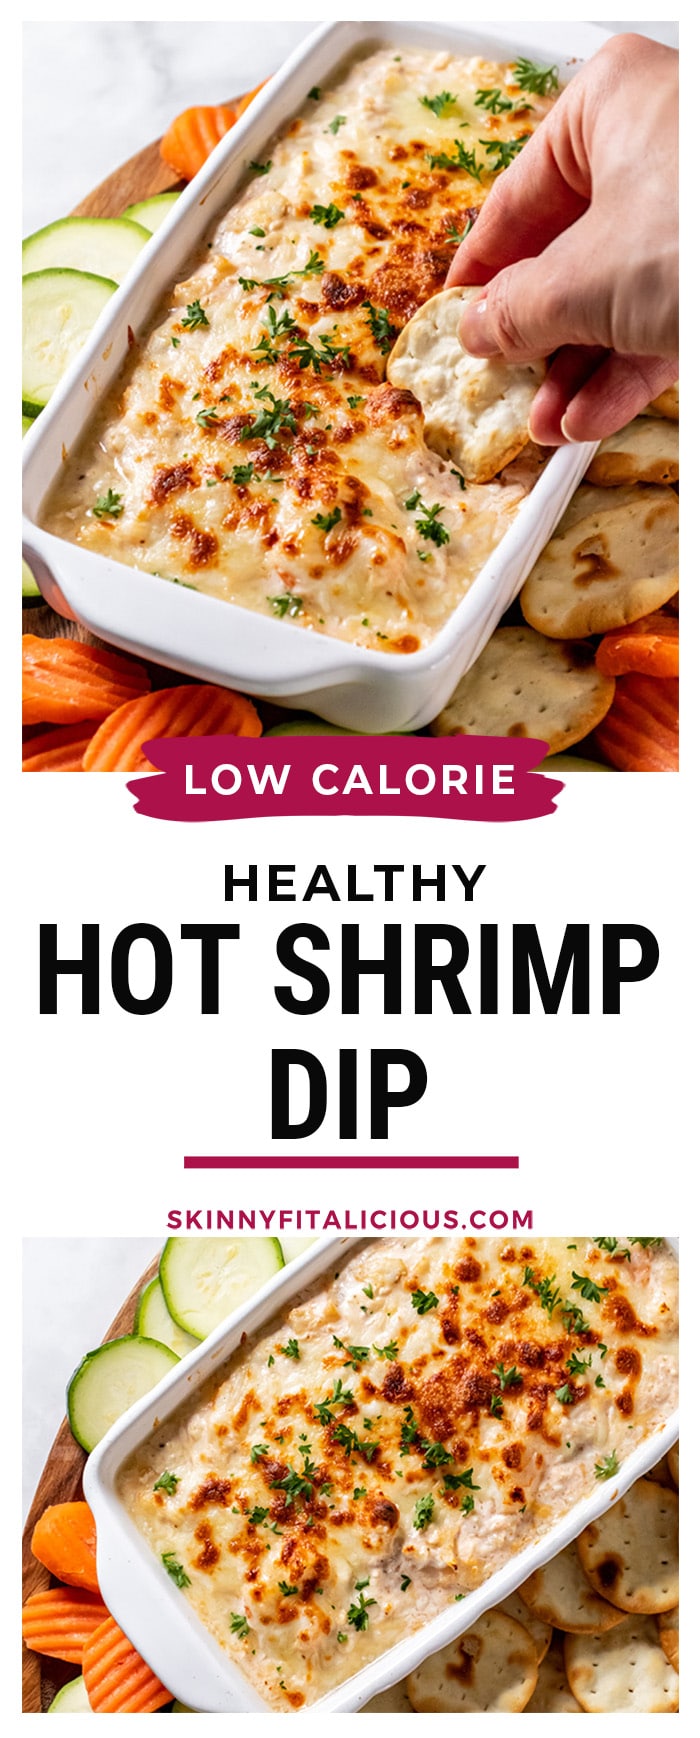 Healthy Hot Shrimp Dip made with yogurt and cottage cheese for a protein boost is low calorie and baked. 